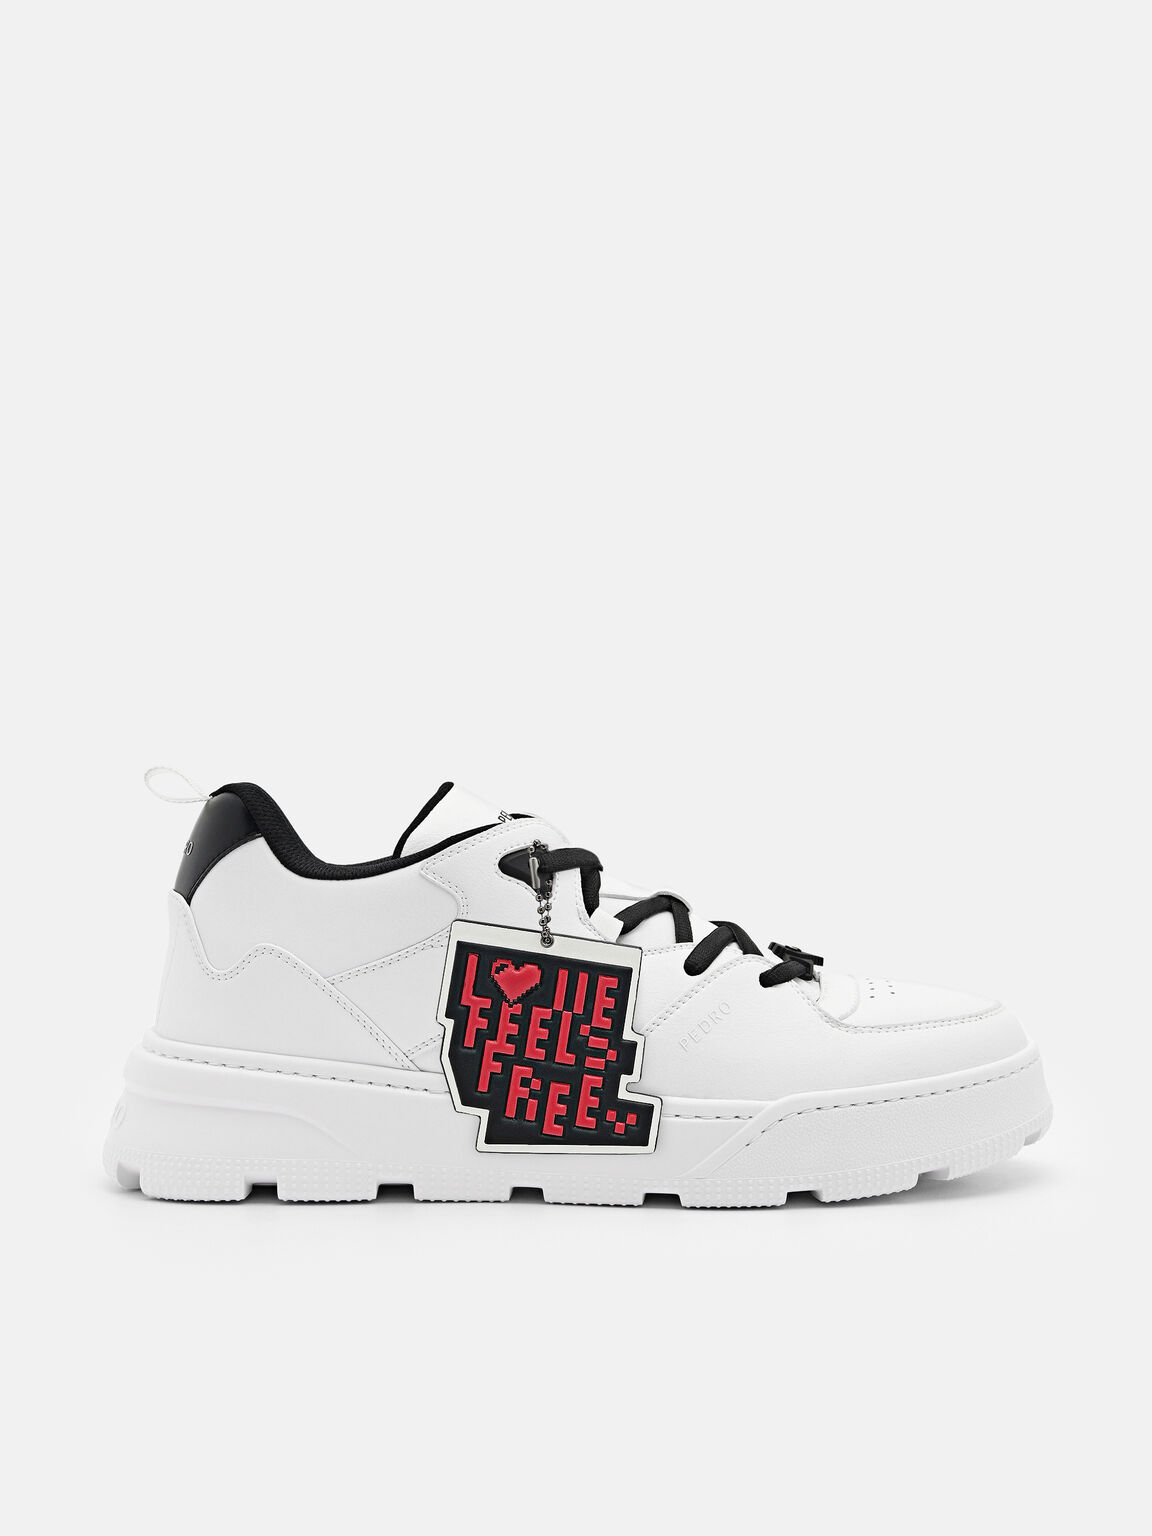 Arc Sneakers, White, hi-res